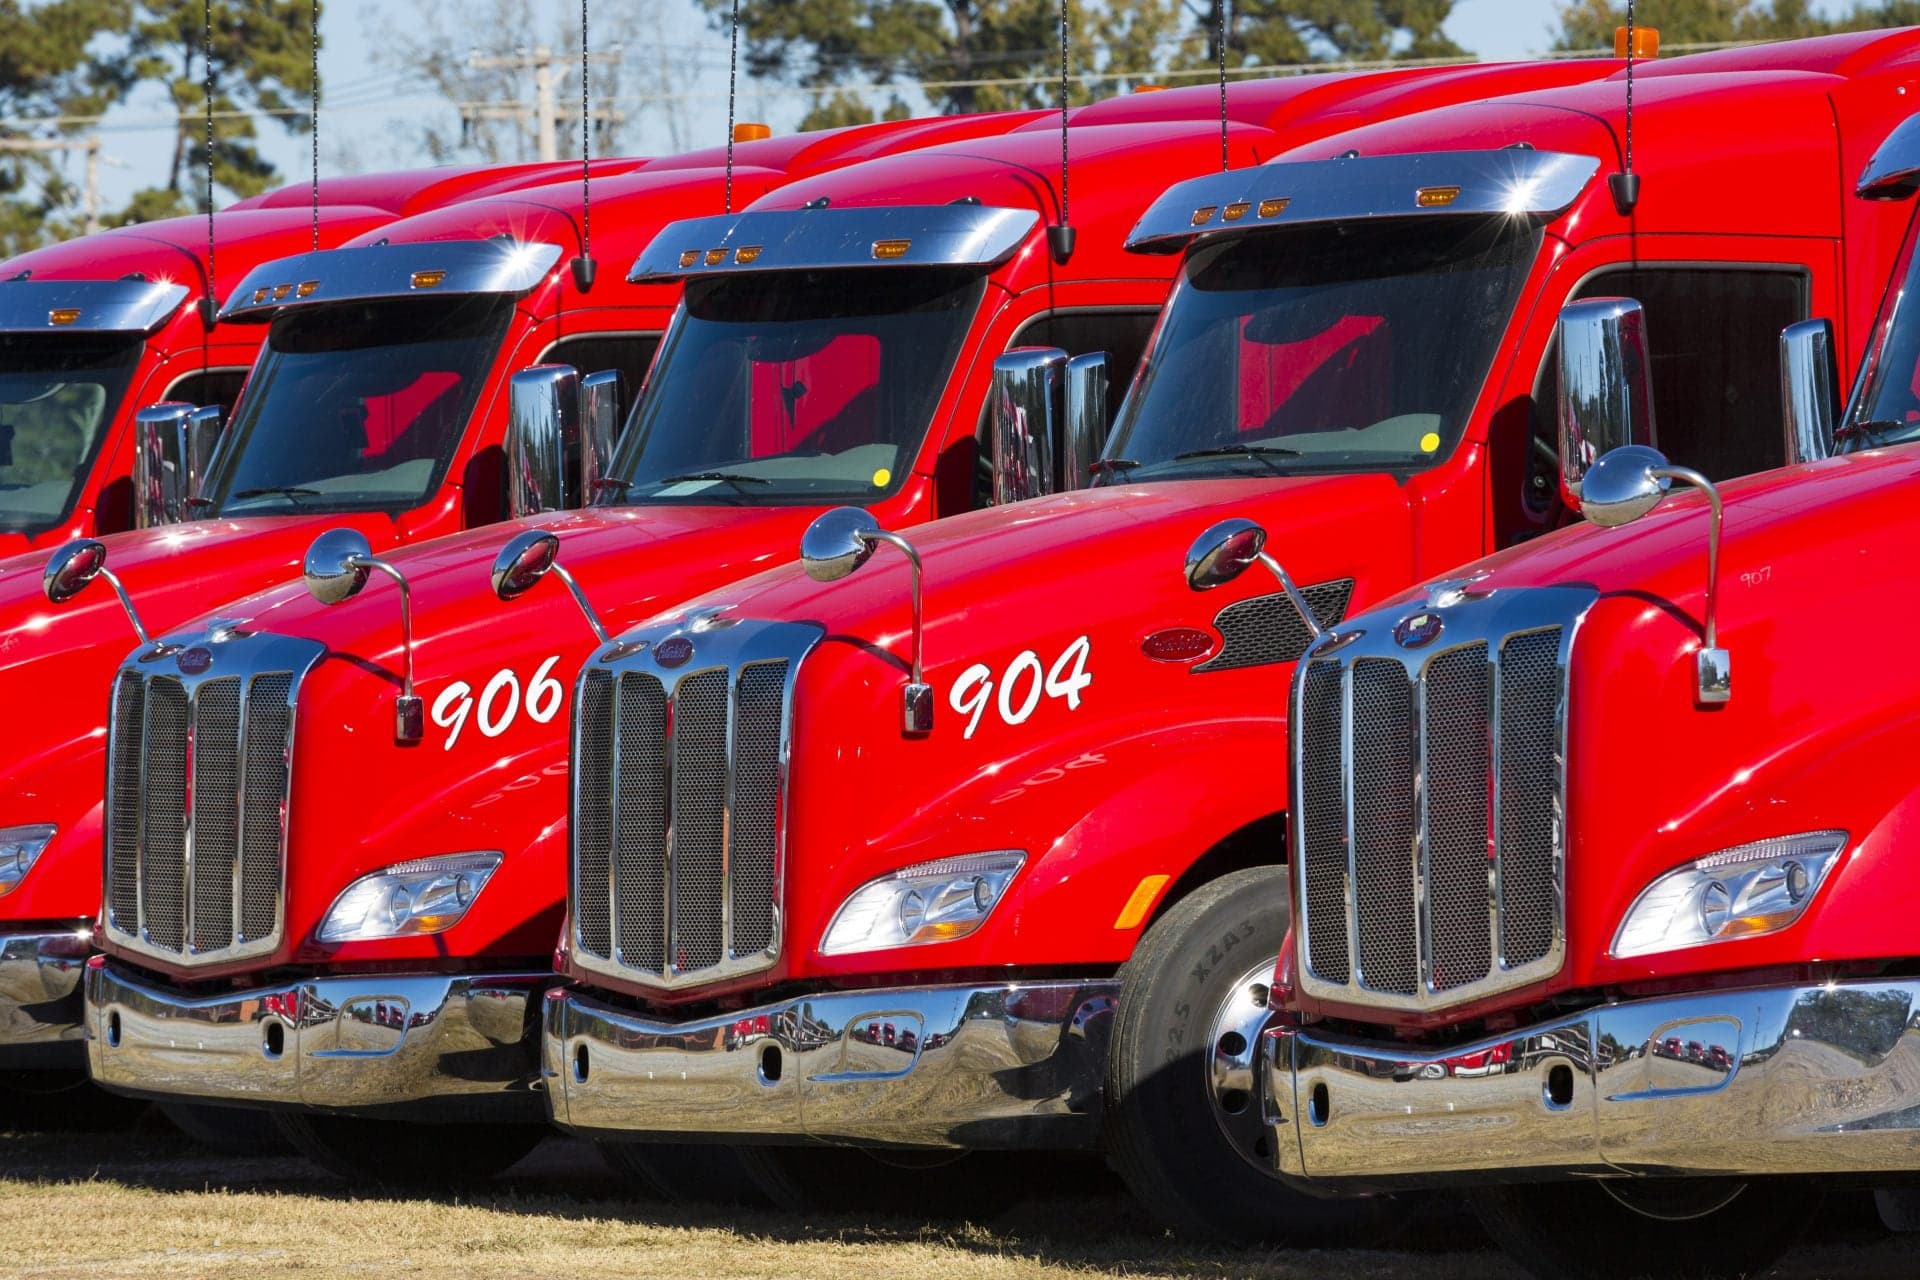 Tennessee Truck Dealer Skirts Emission Standards with Legal Loophole